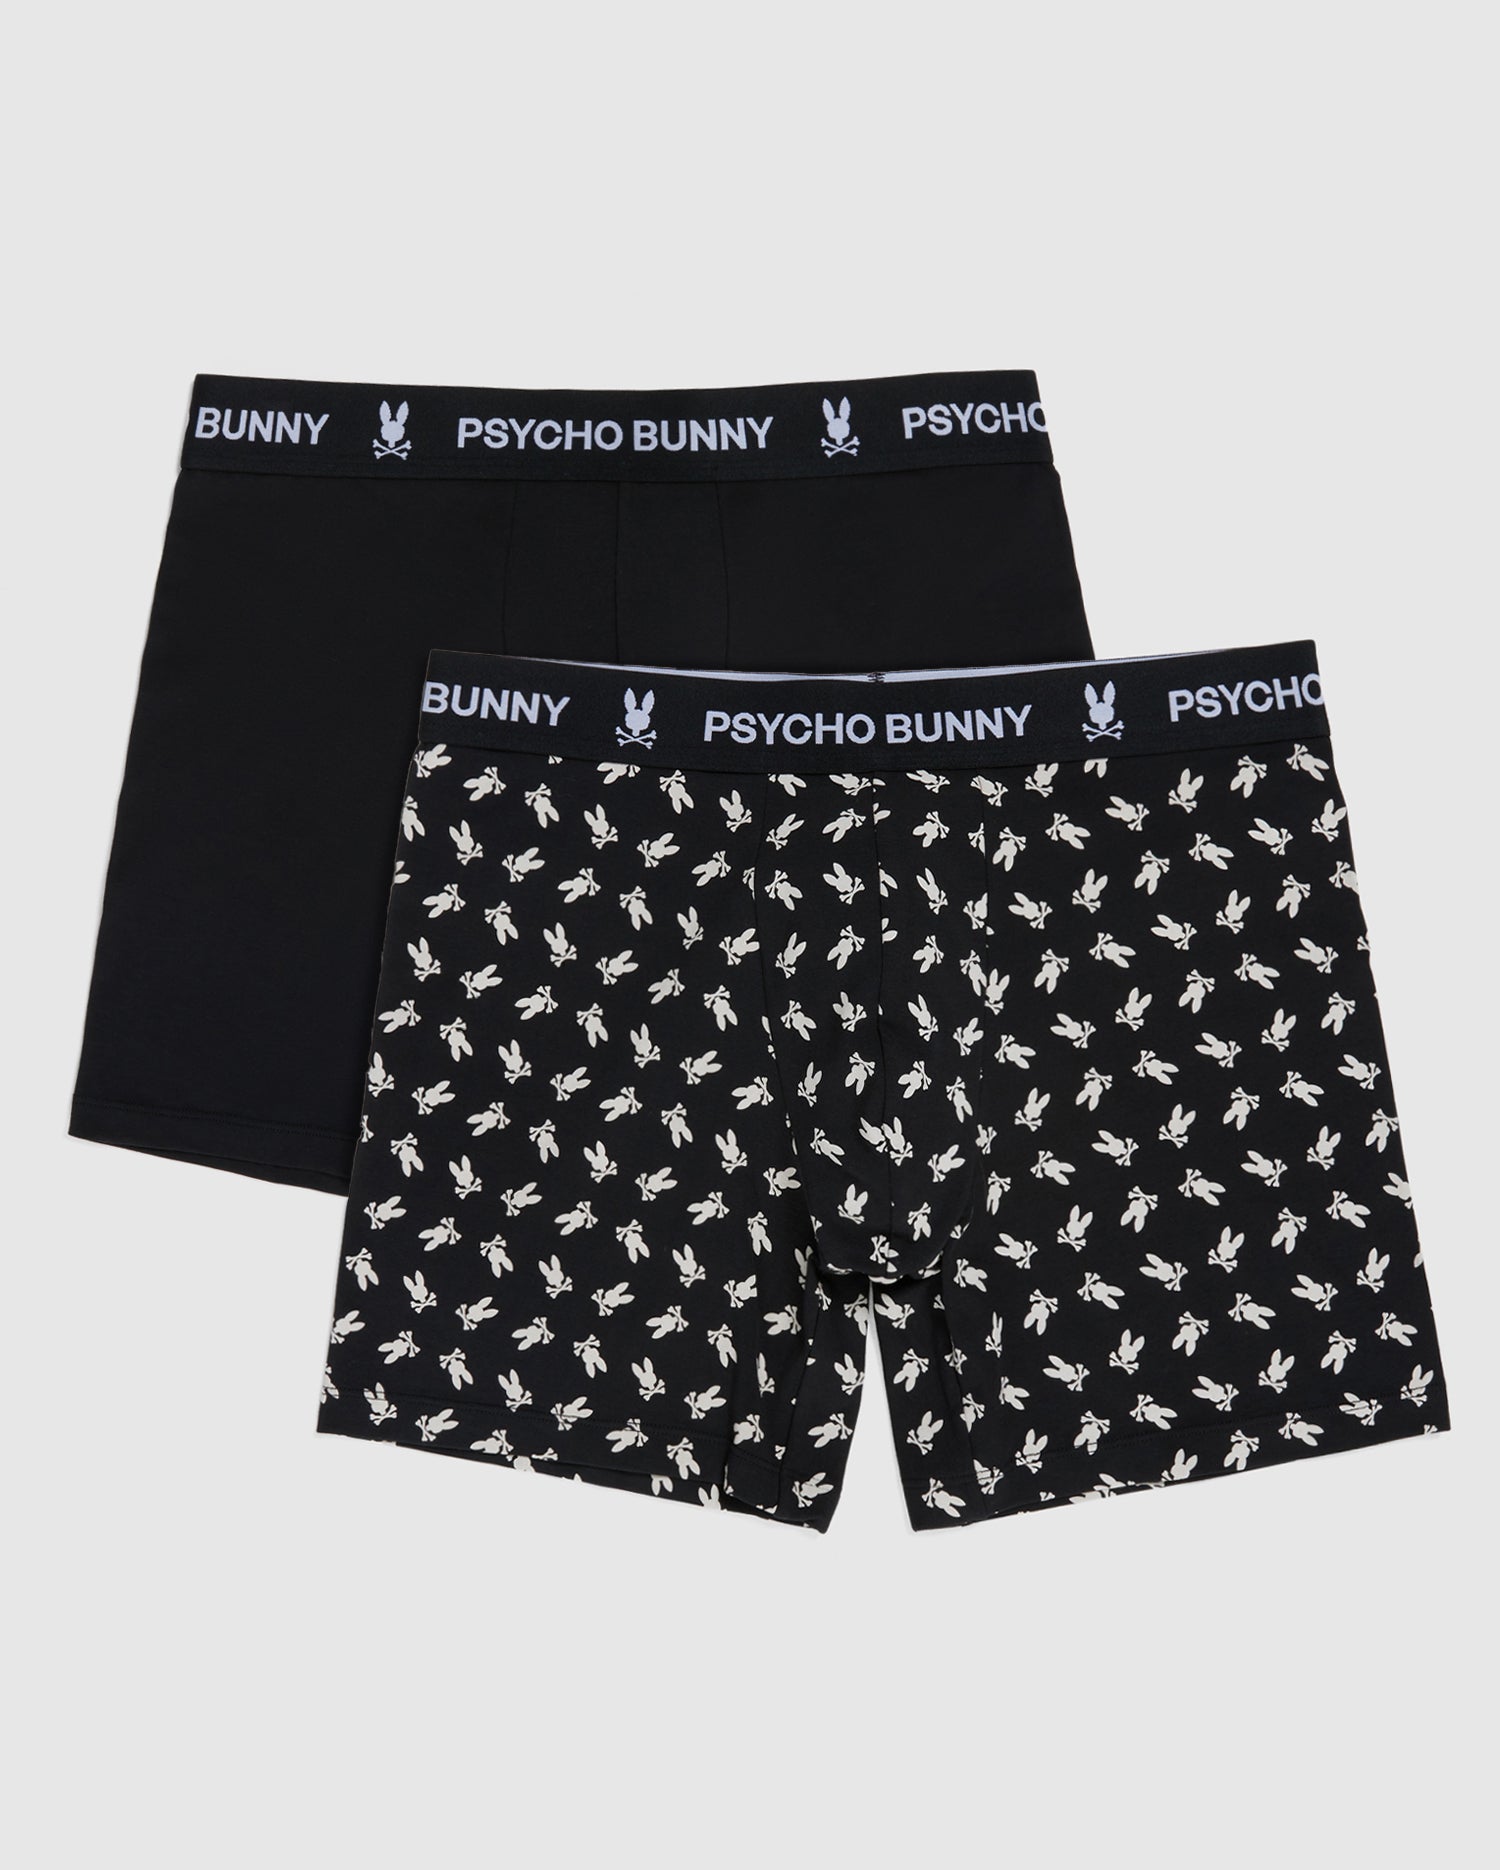 MENS NAVY SOLID KNIT 2 PACK BOXER BRIEF | PSYCHO BUNNY